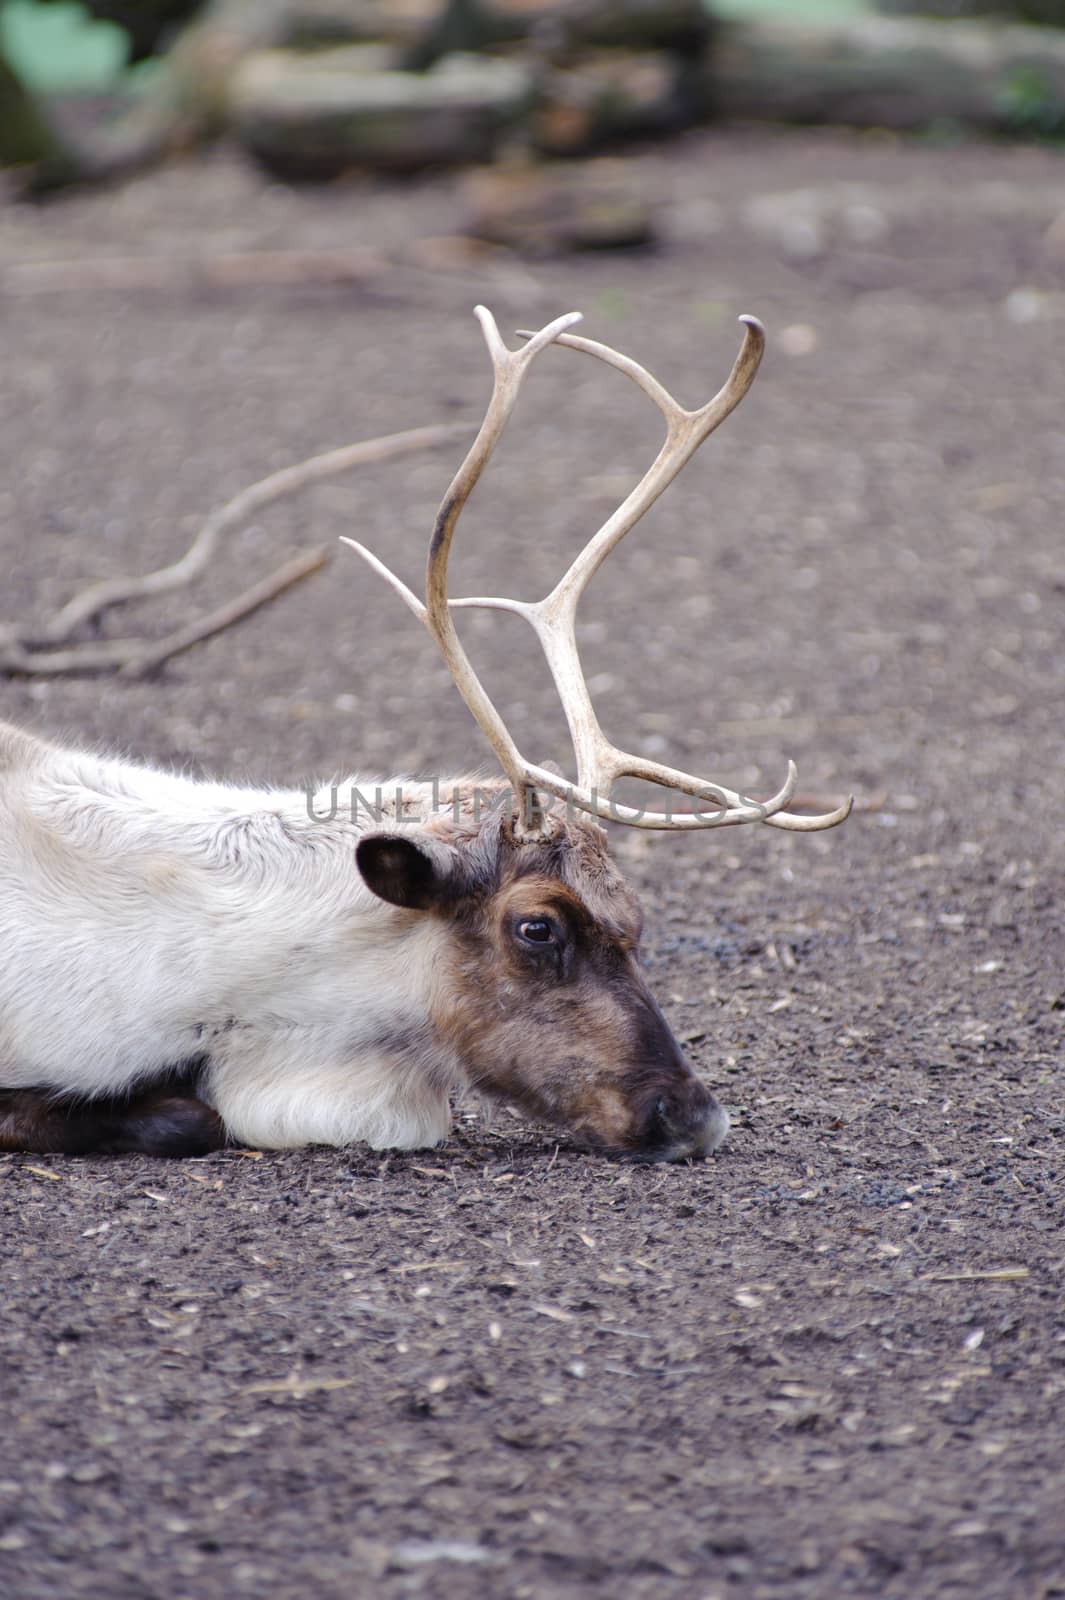 Reindeer has rest by kmwphotography